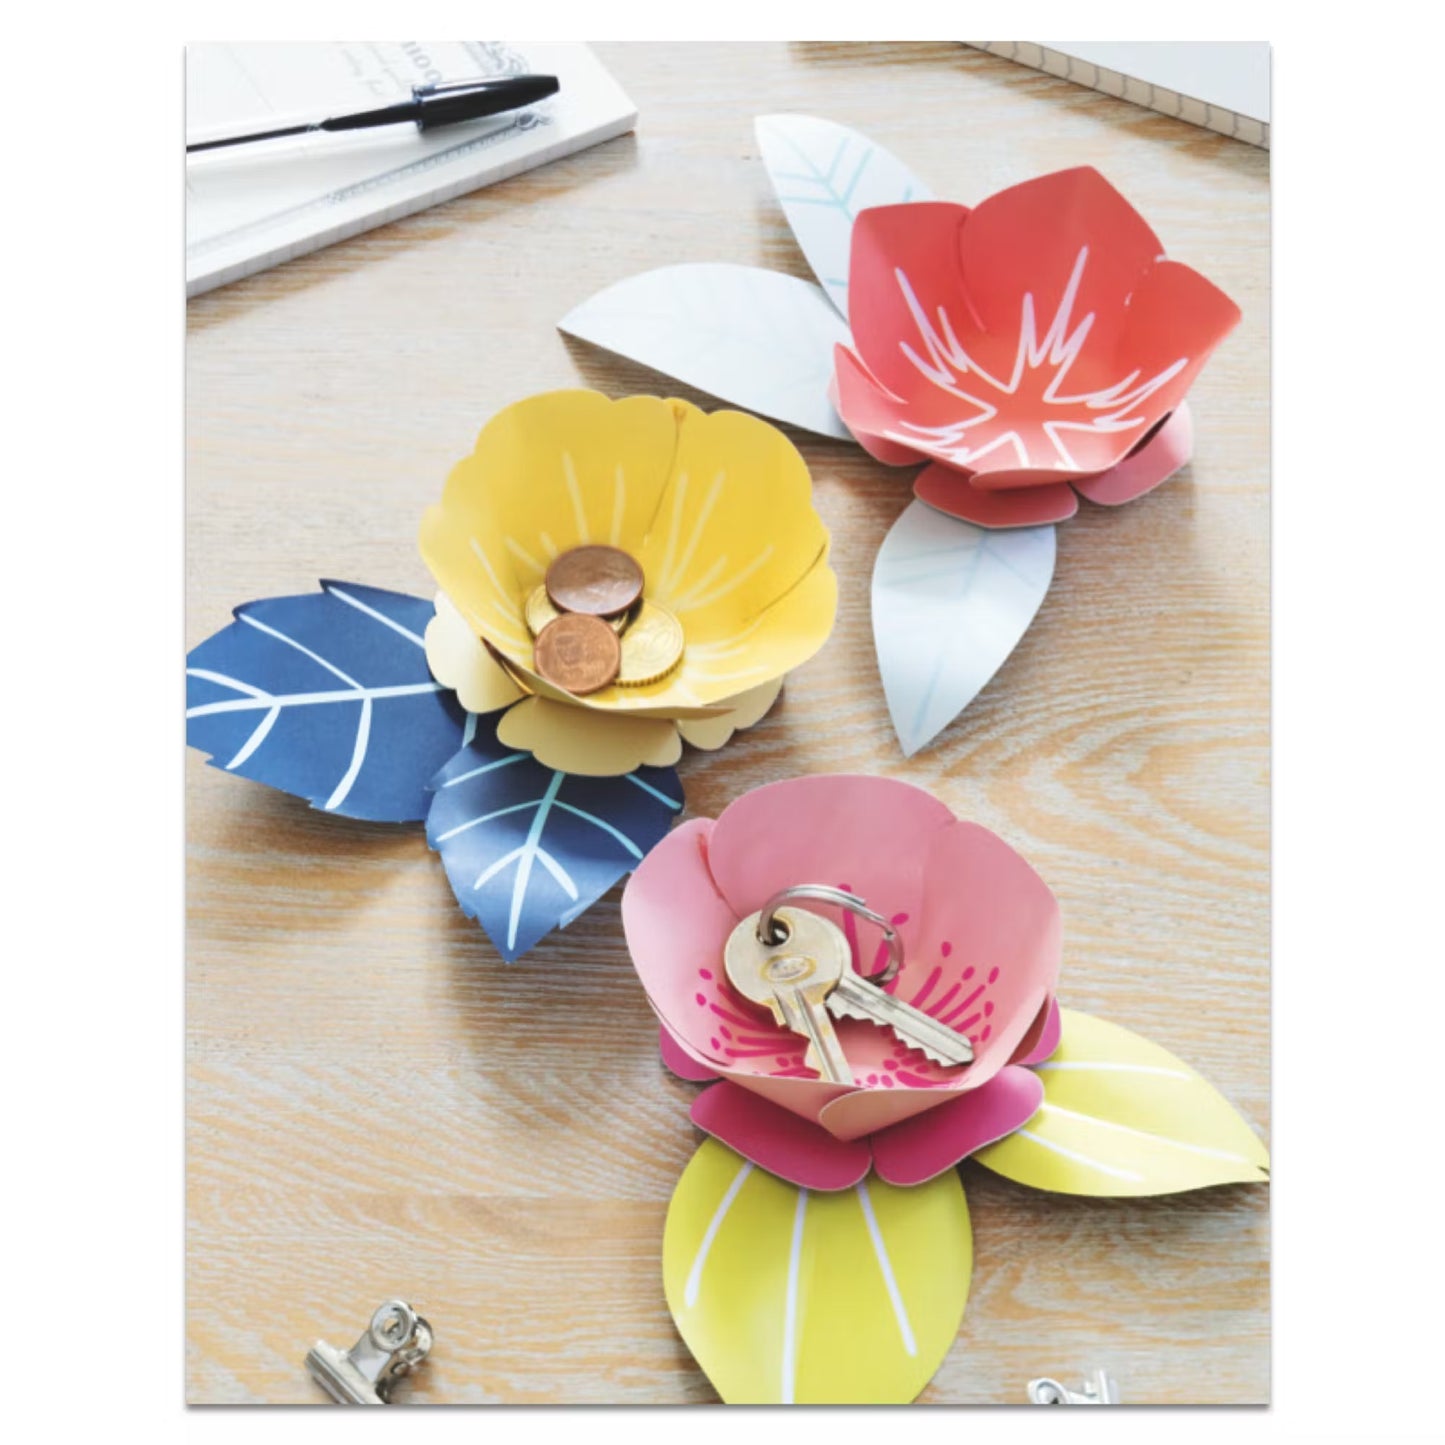 Kit to create 3 flower pockets 